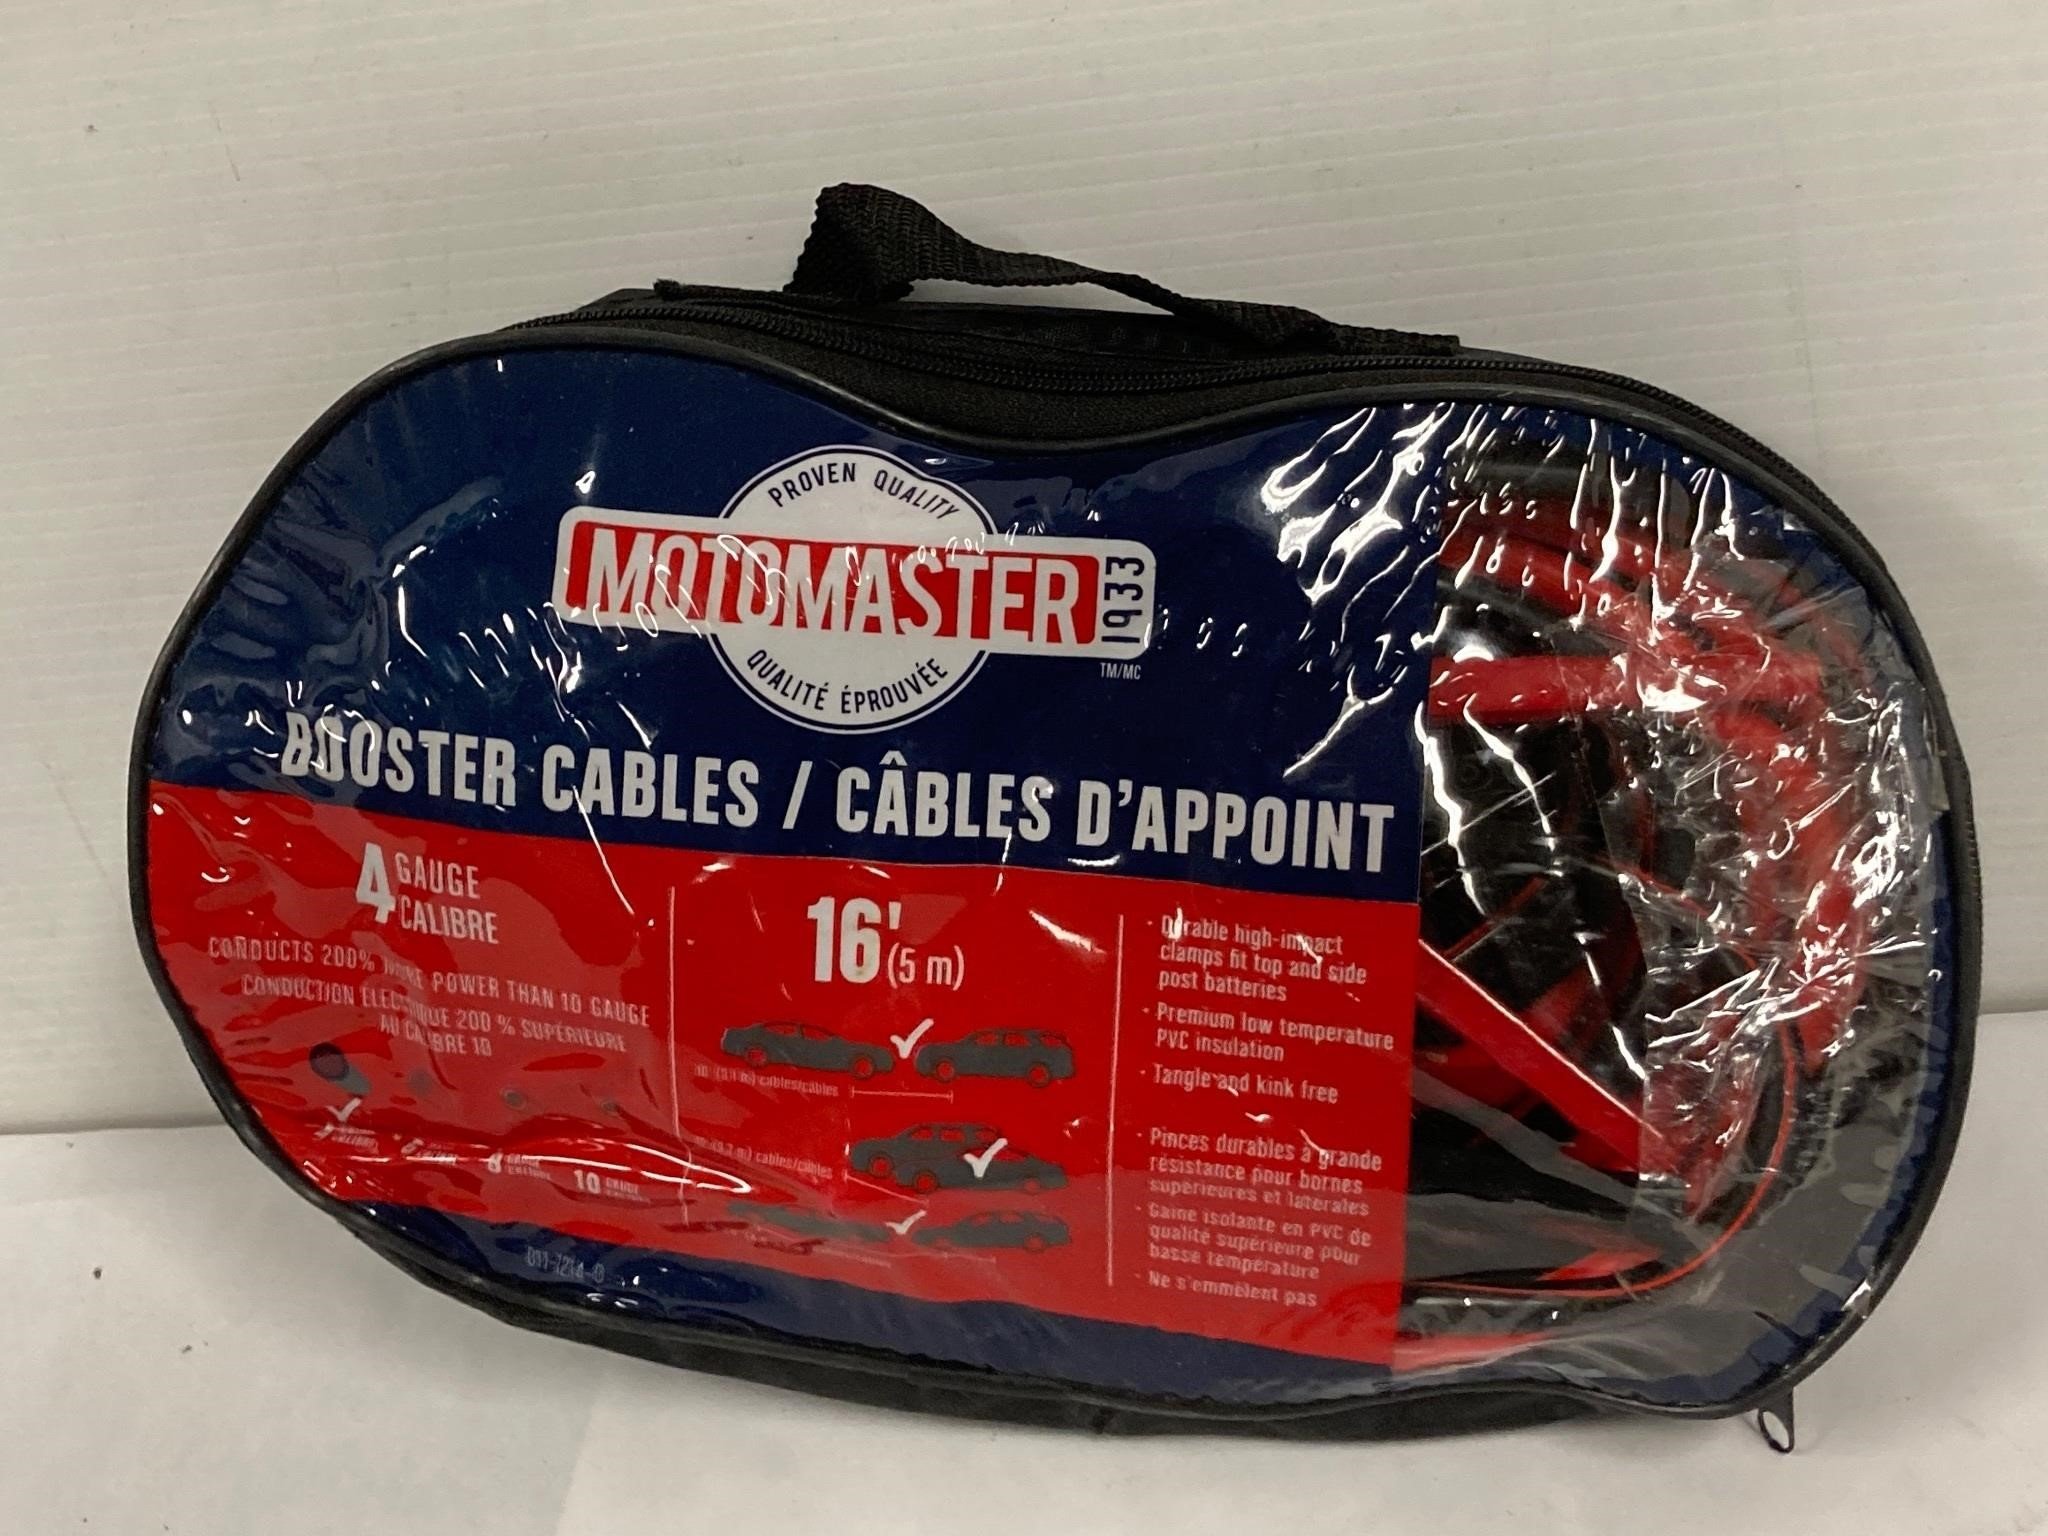 Motomaster booster cables. 16 ft. Unused